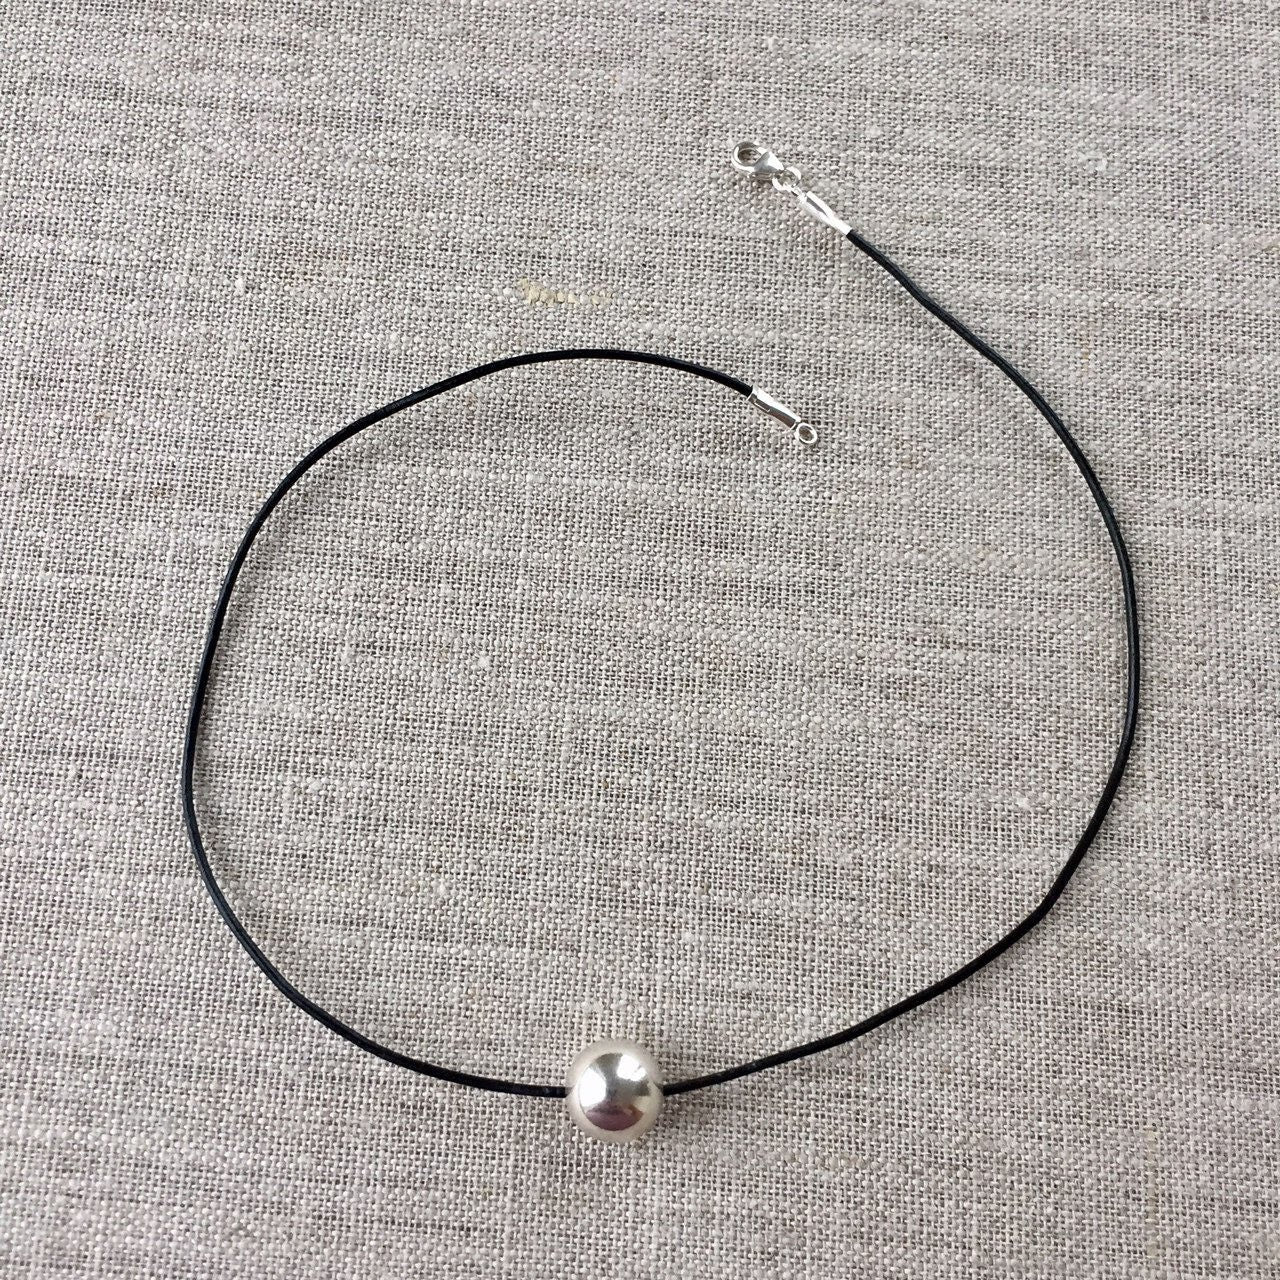 Black leather choker necklace with sterling silver ball strung on soft beautiful leather with sterling clasp